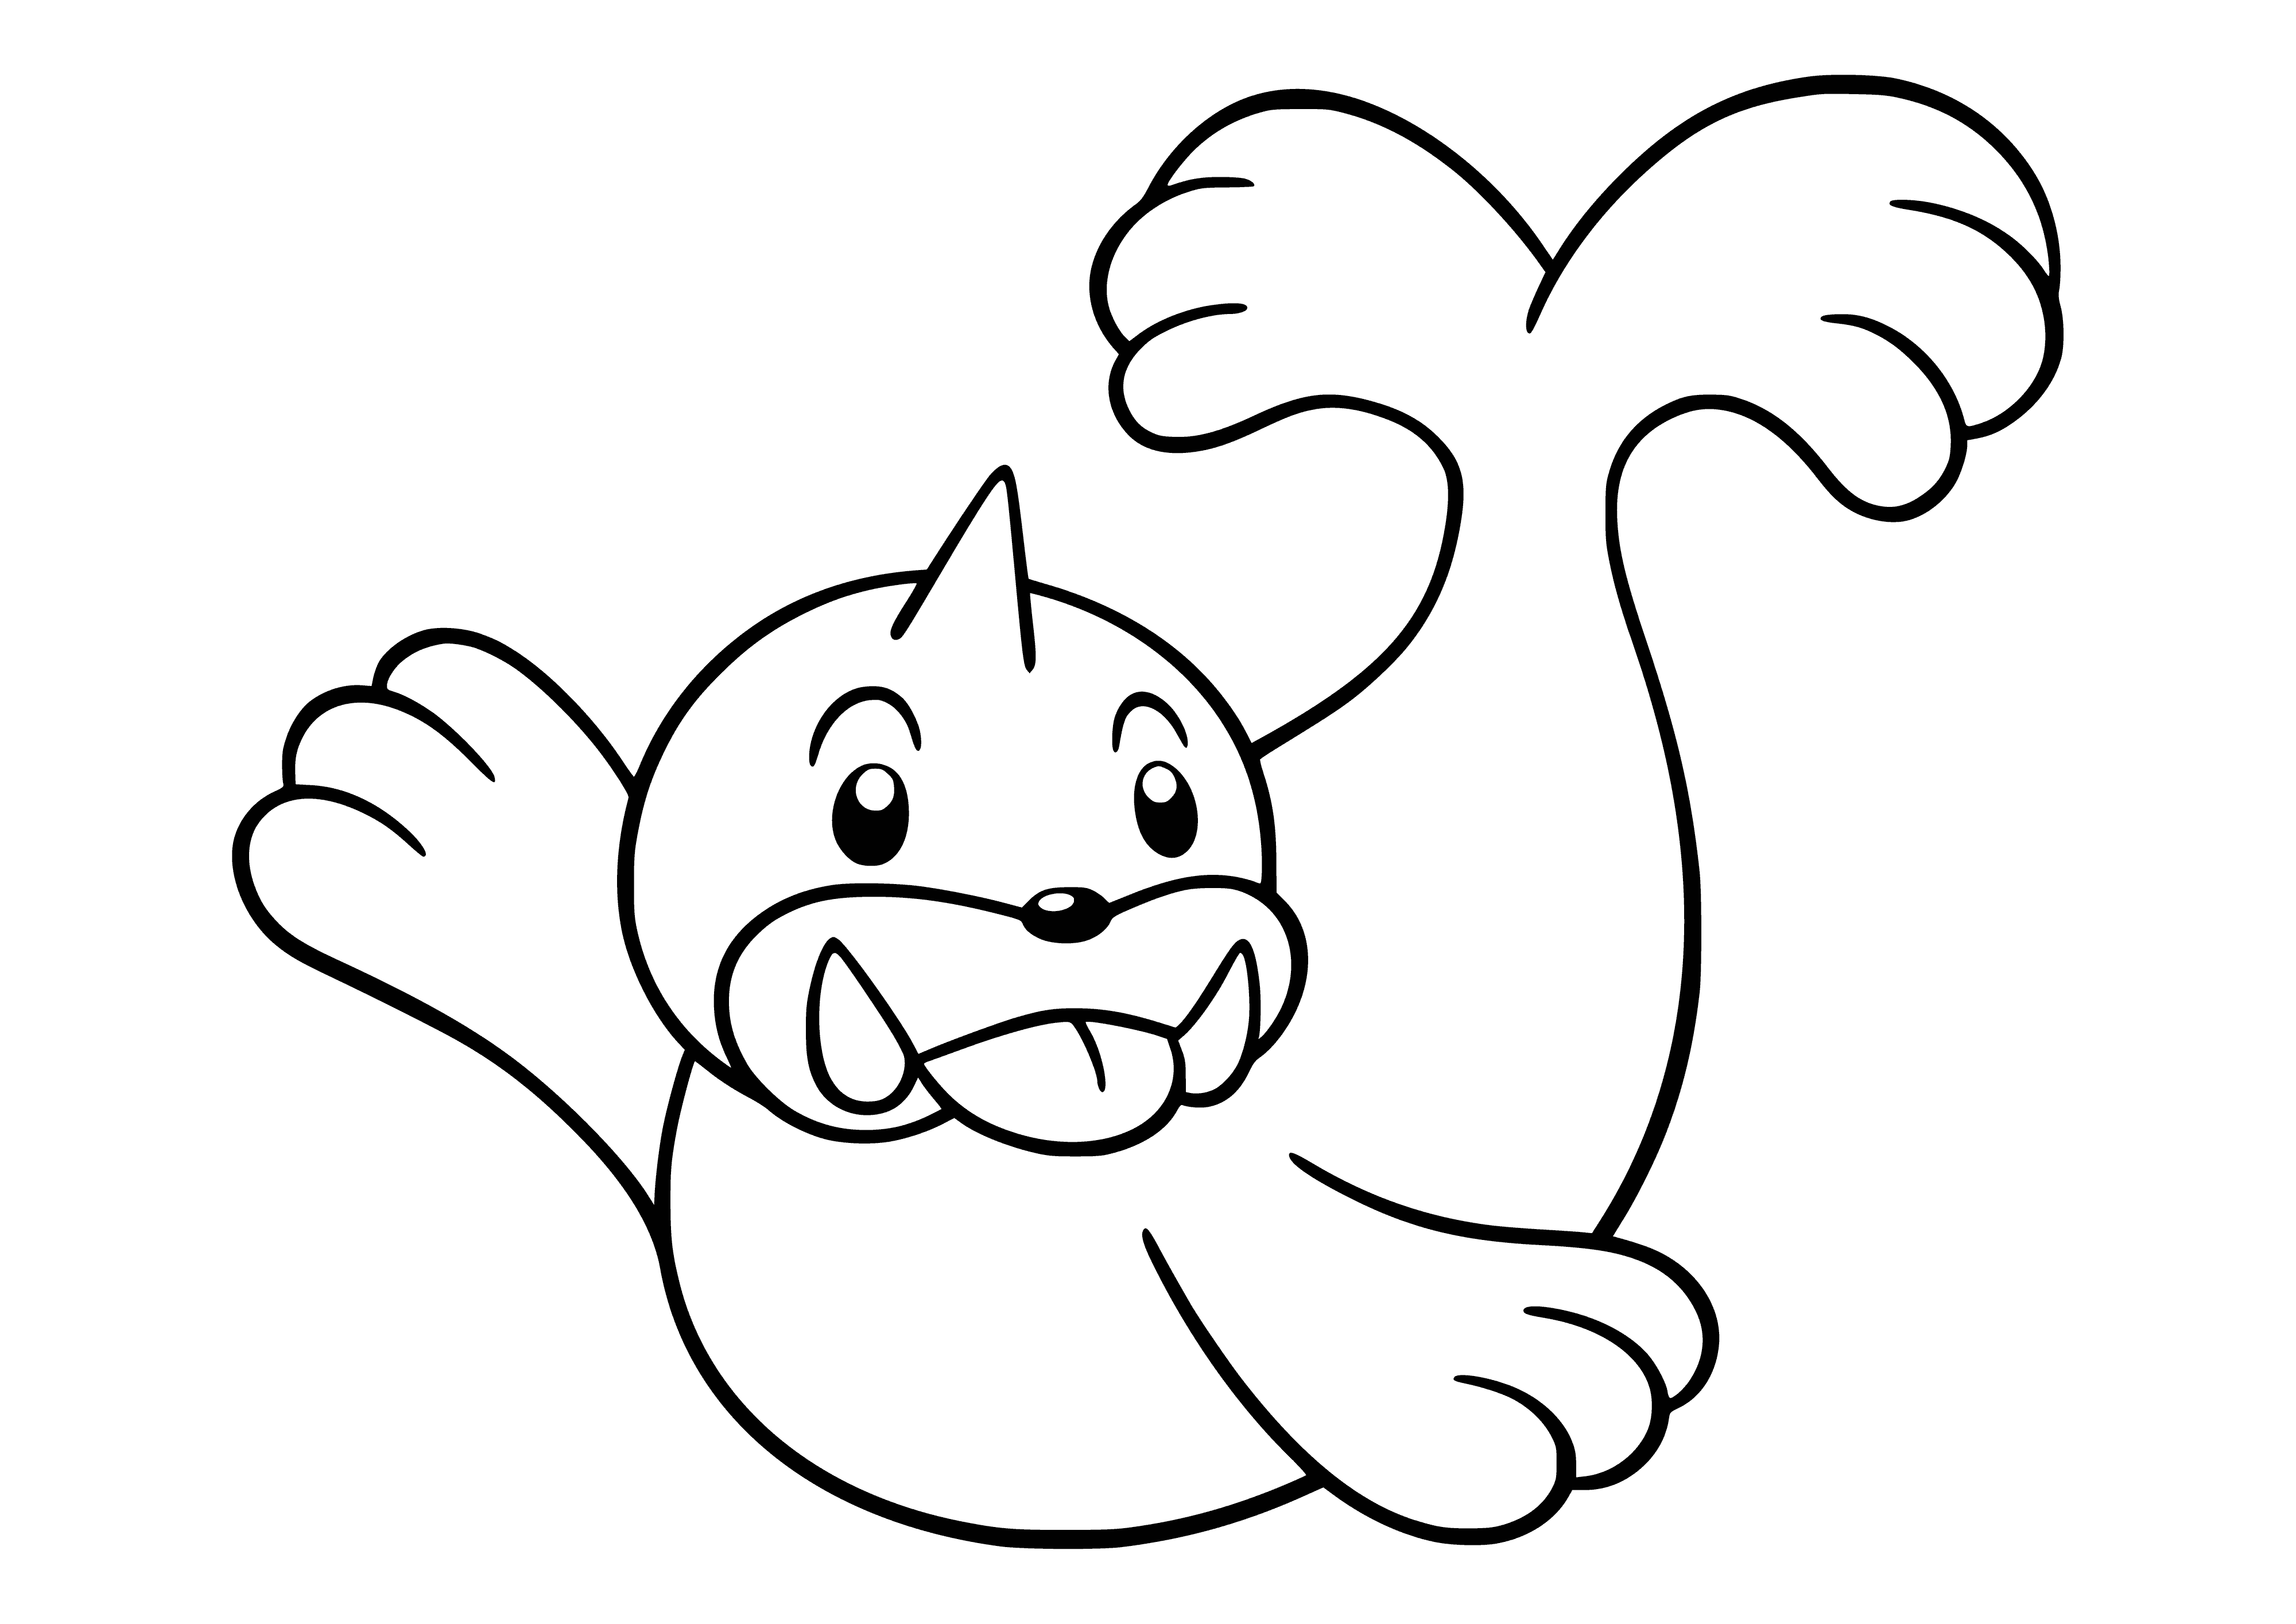 Pokemon Seel coloring page